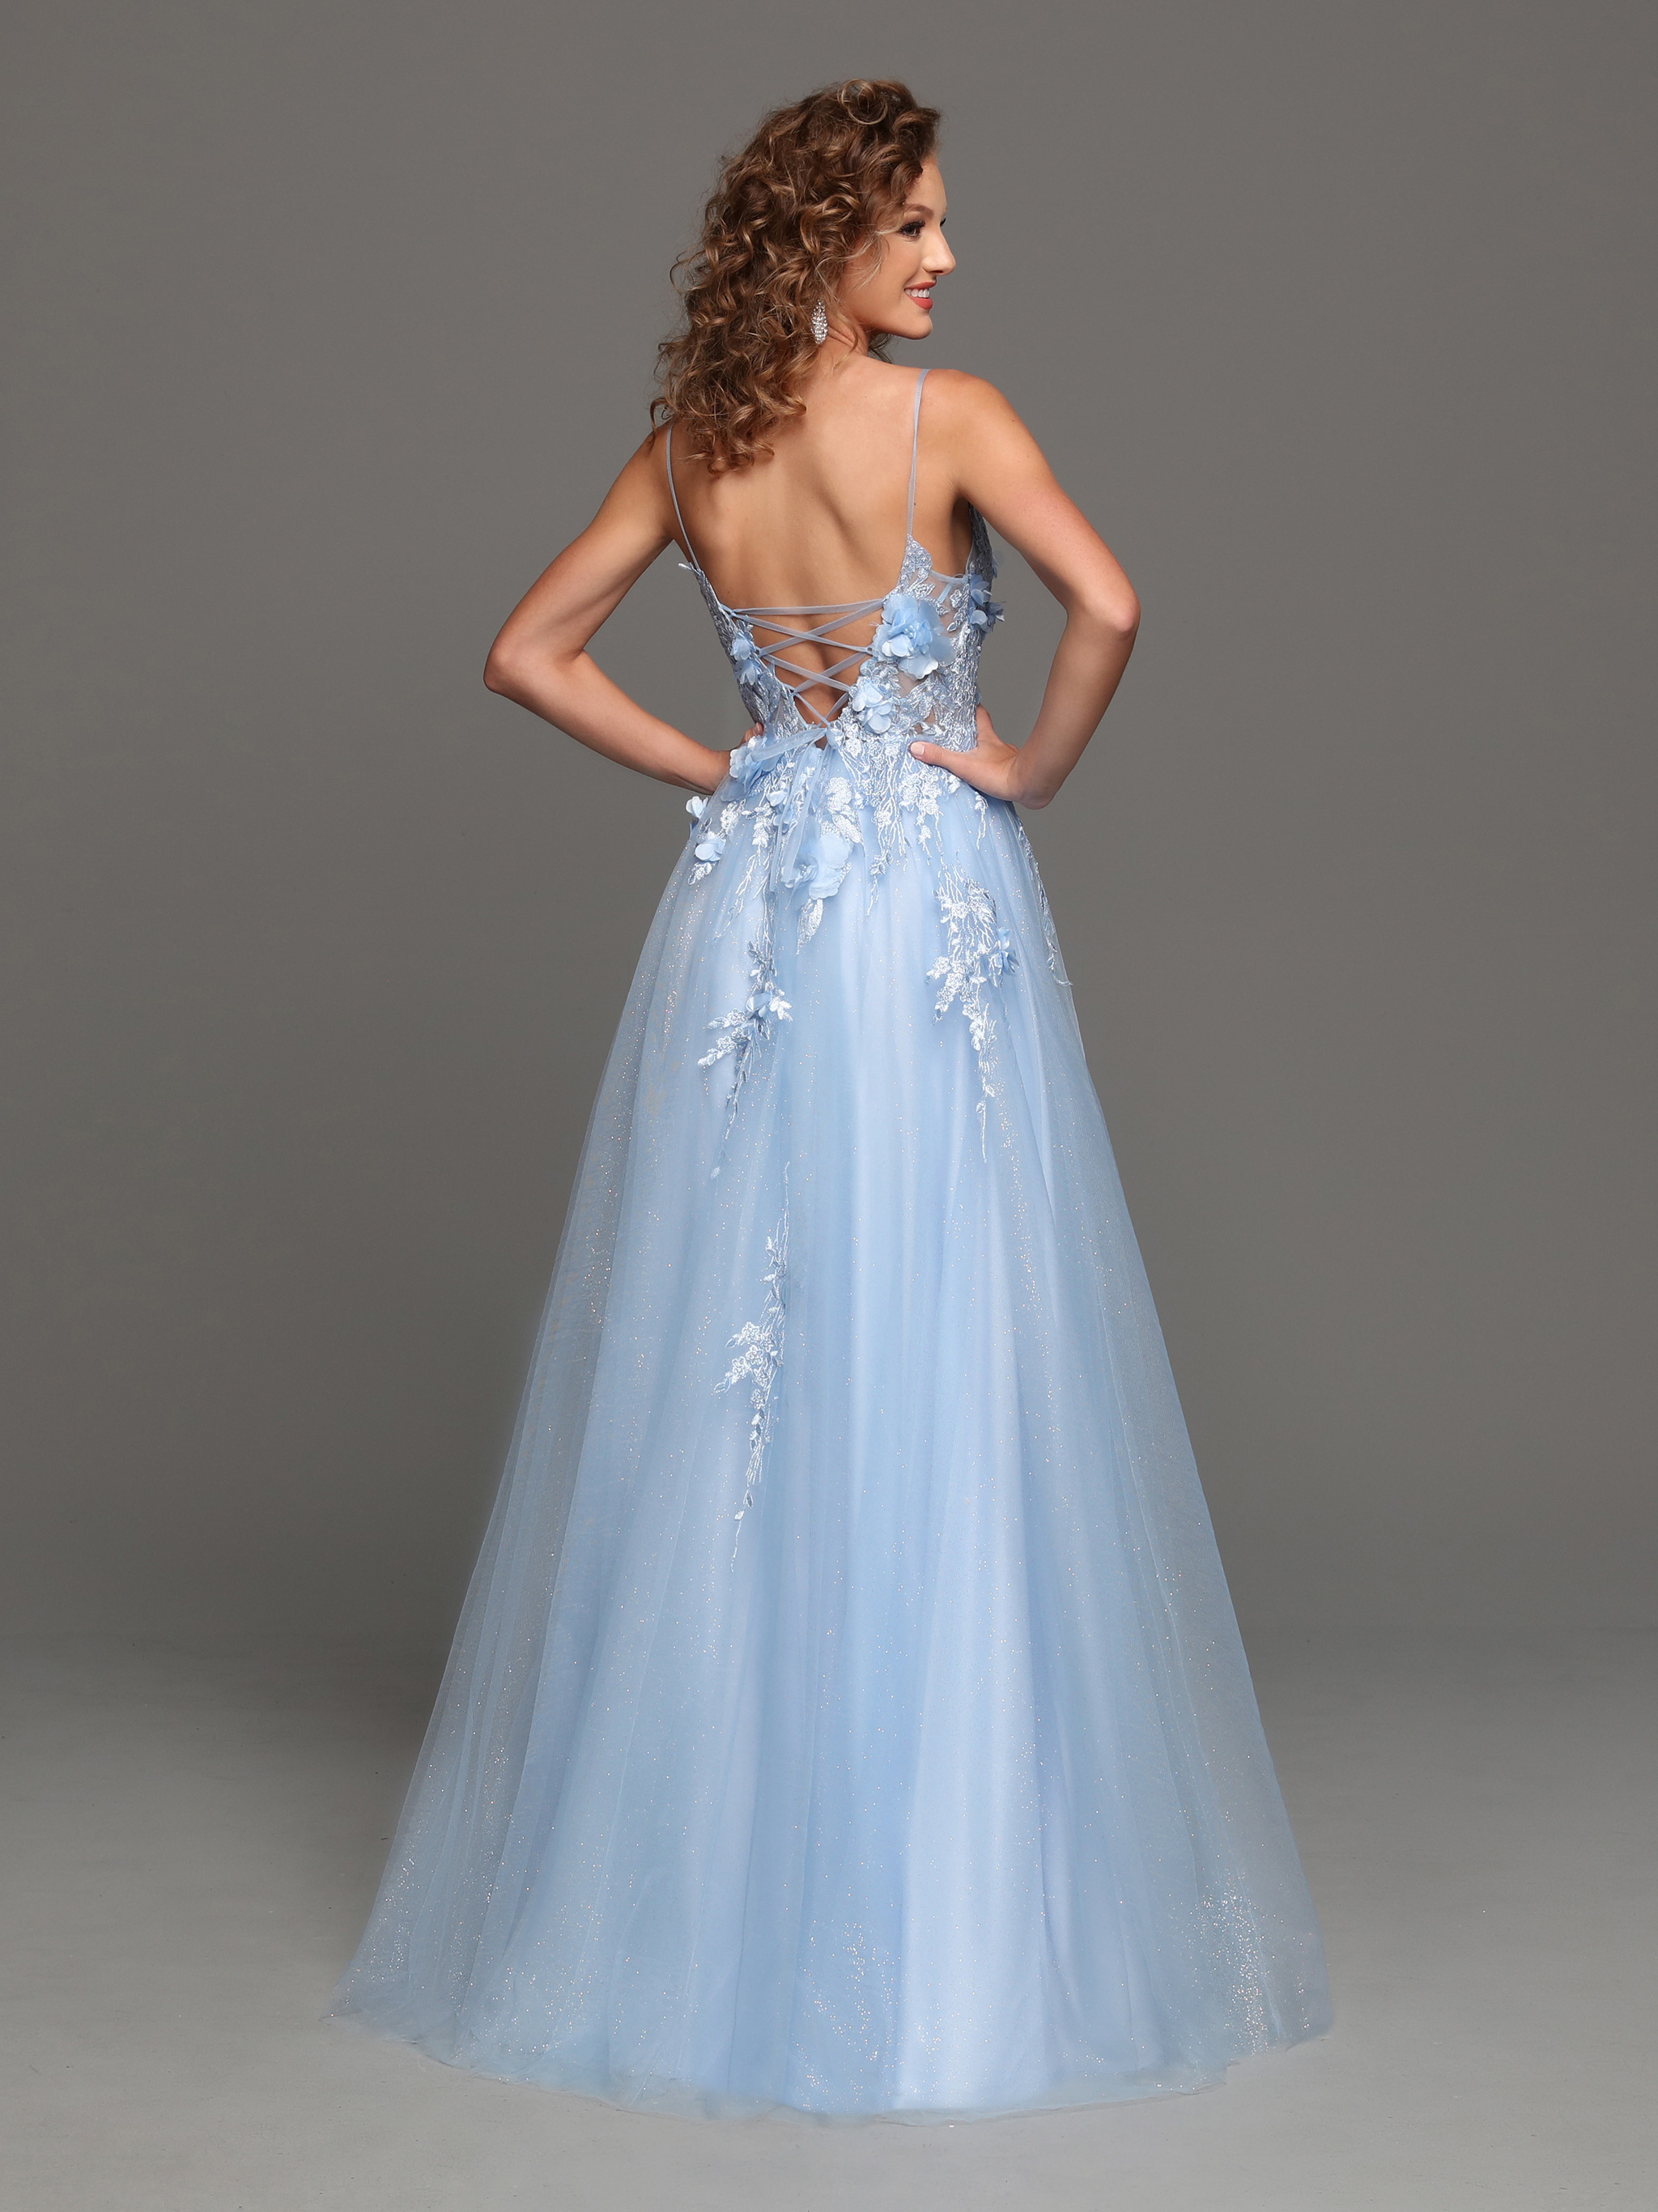 Image showing back view of style #72241